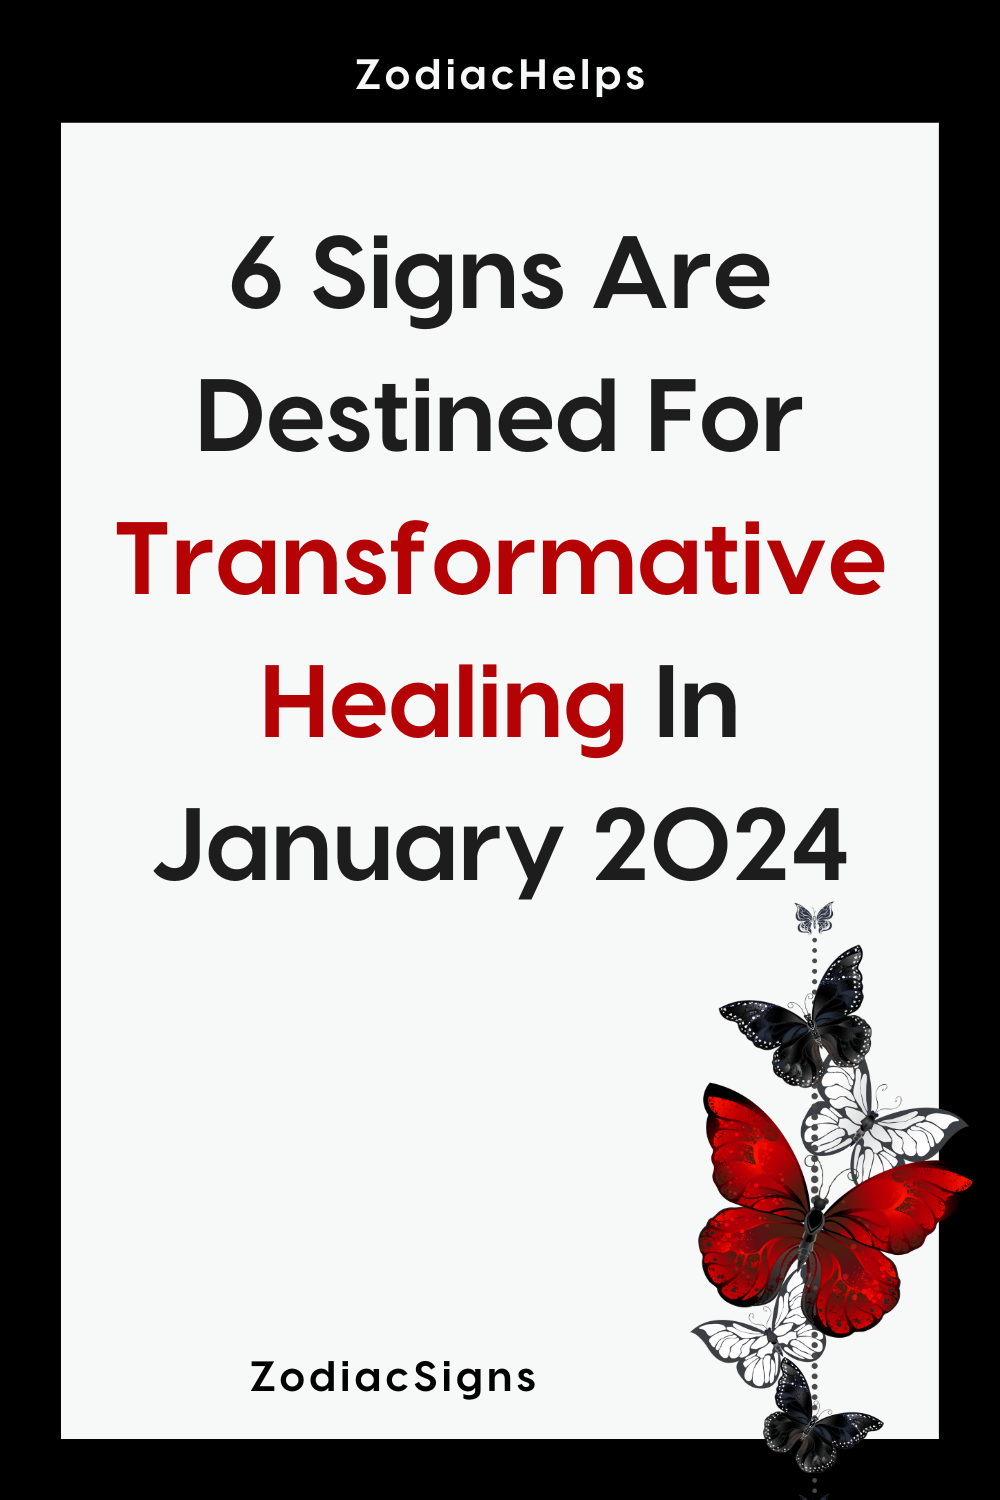 6 Signs Are Destined For Transformative Healing In January 2024